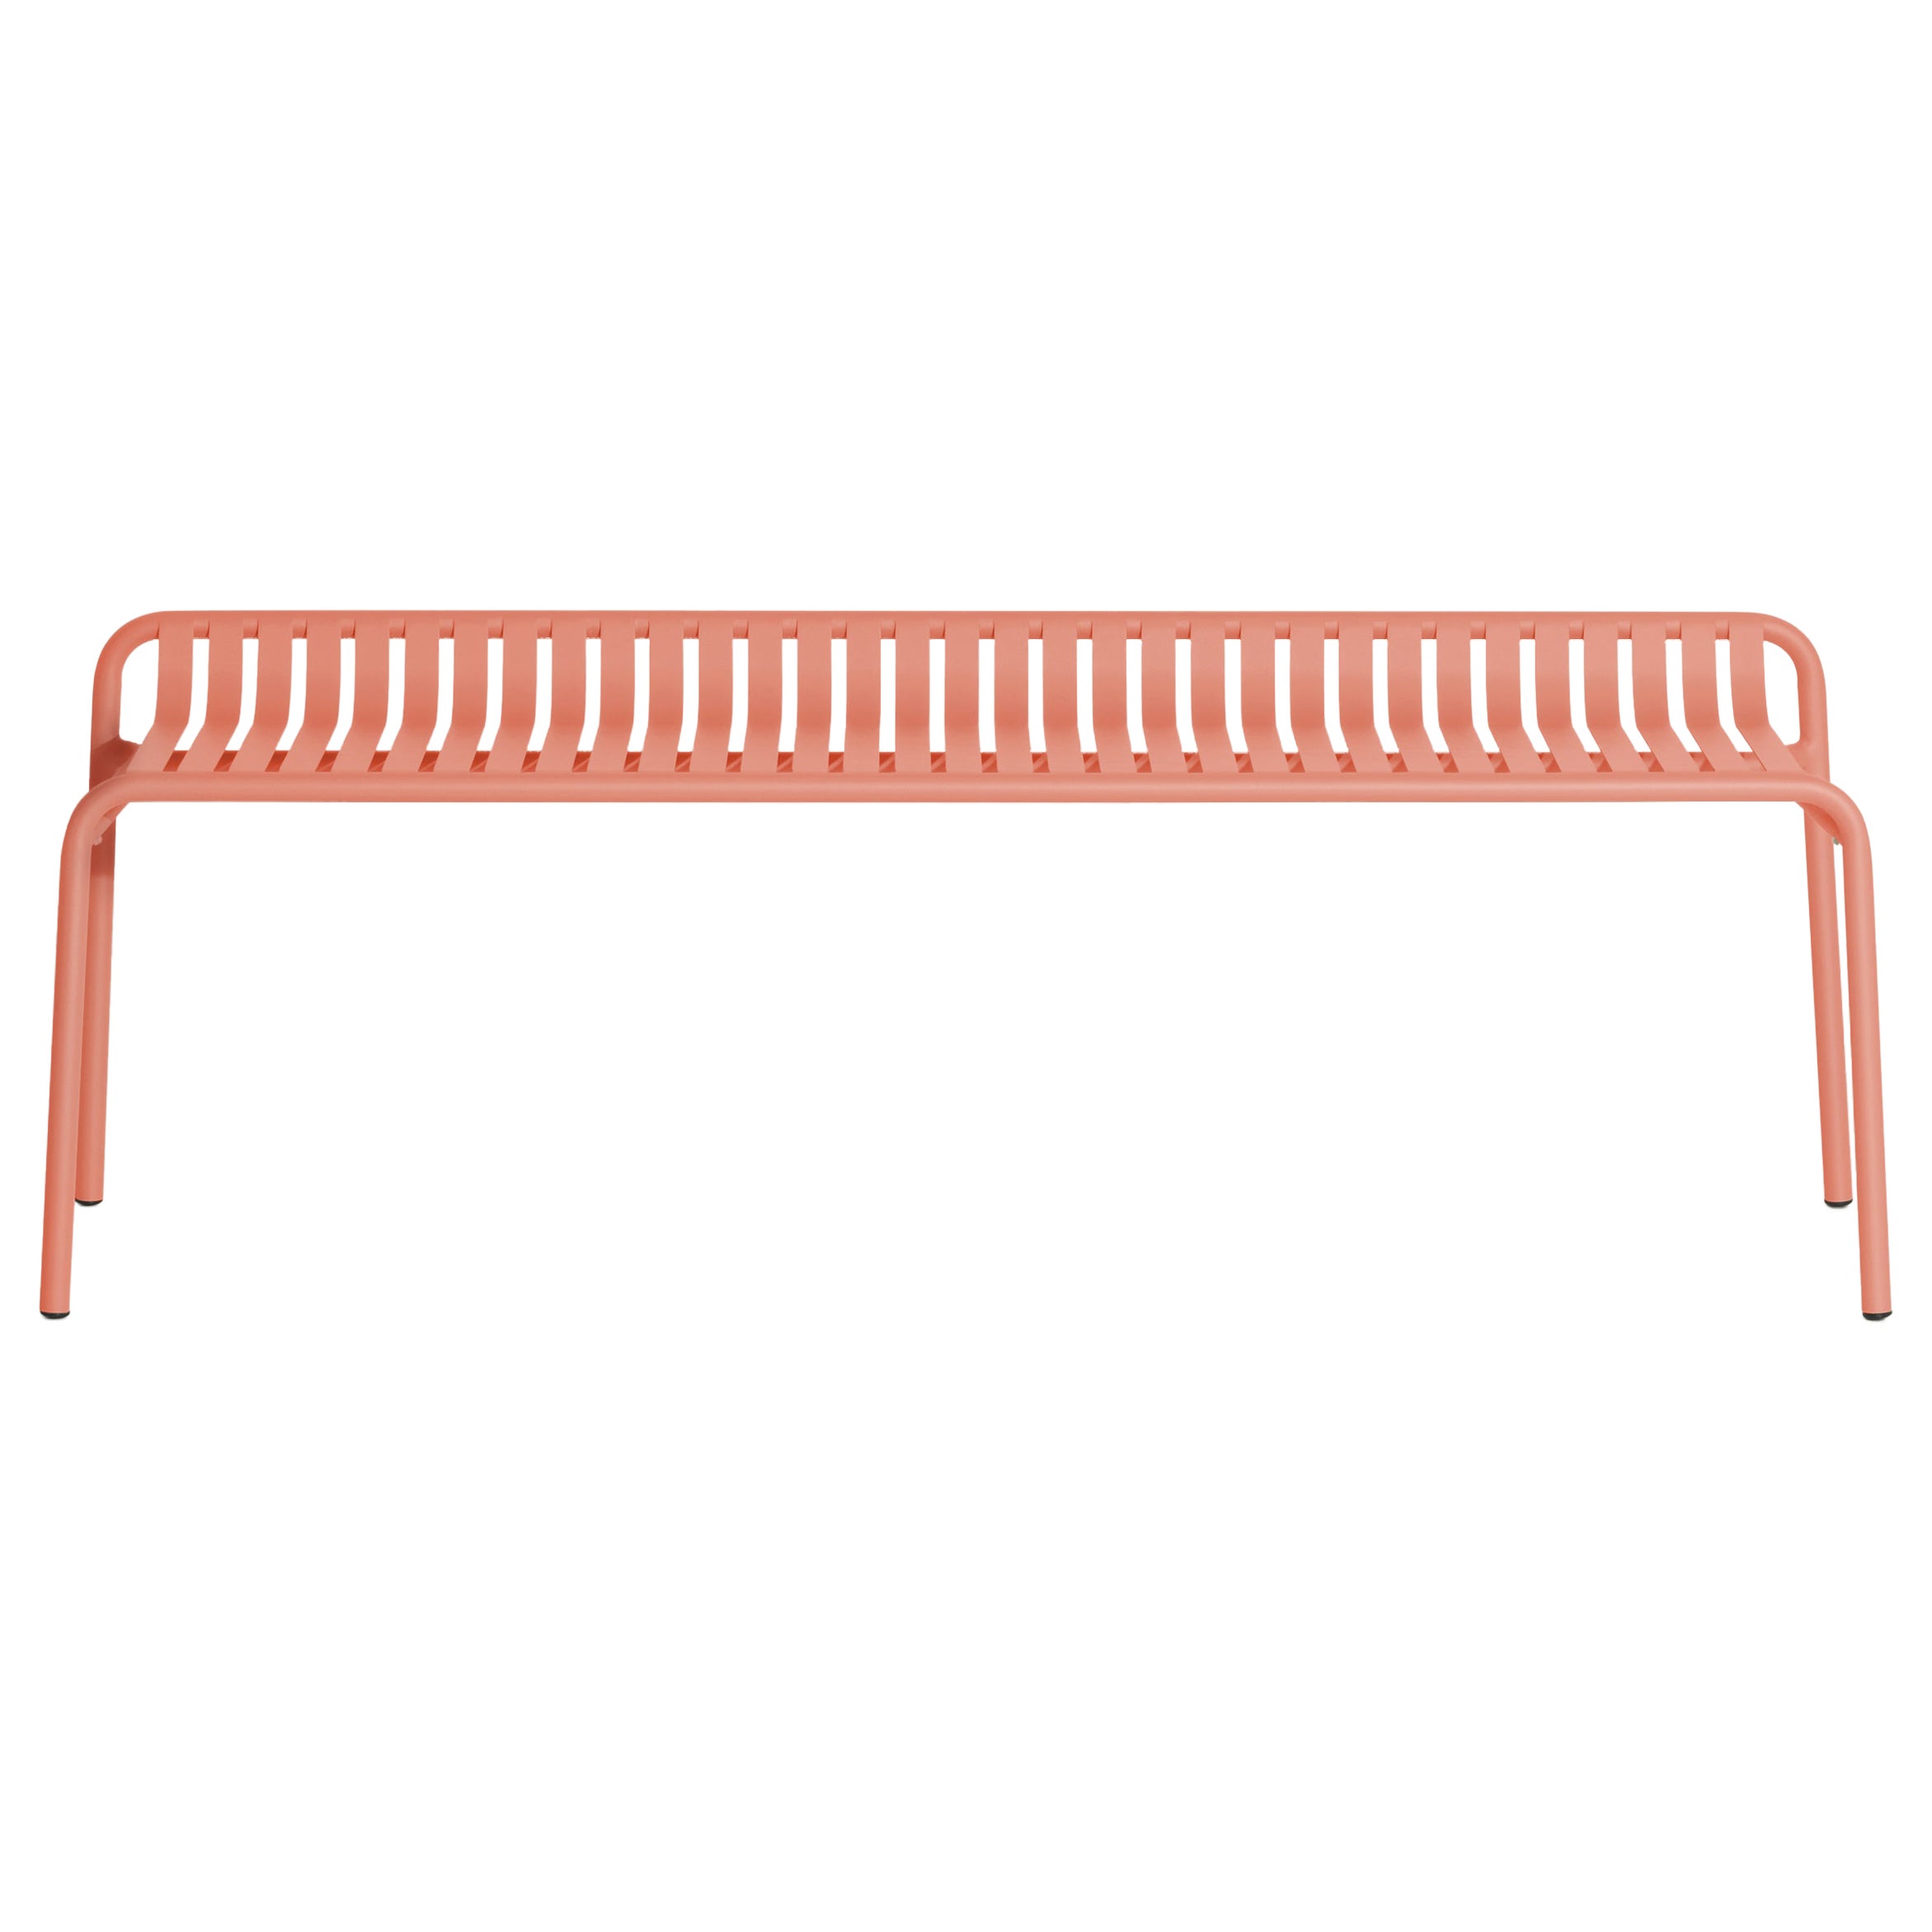 Petite Friture Week-End Bench without Back in Coral Aluminium, 2017  For Sale